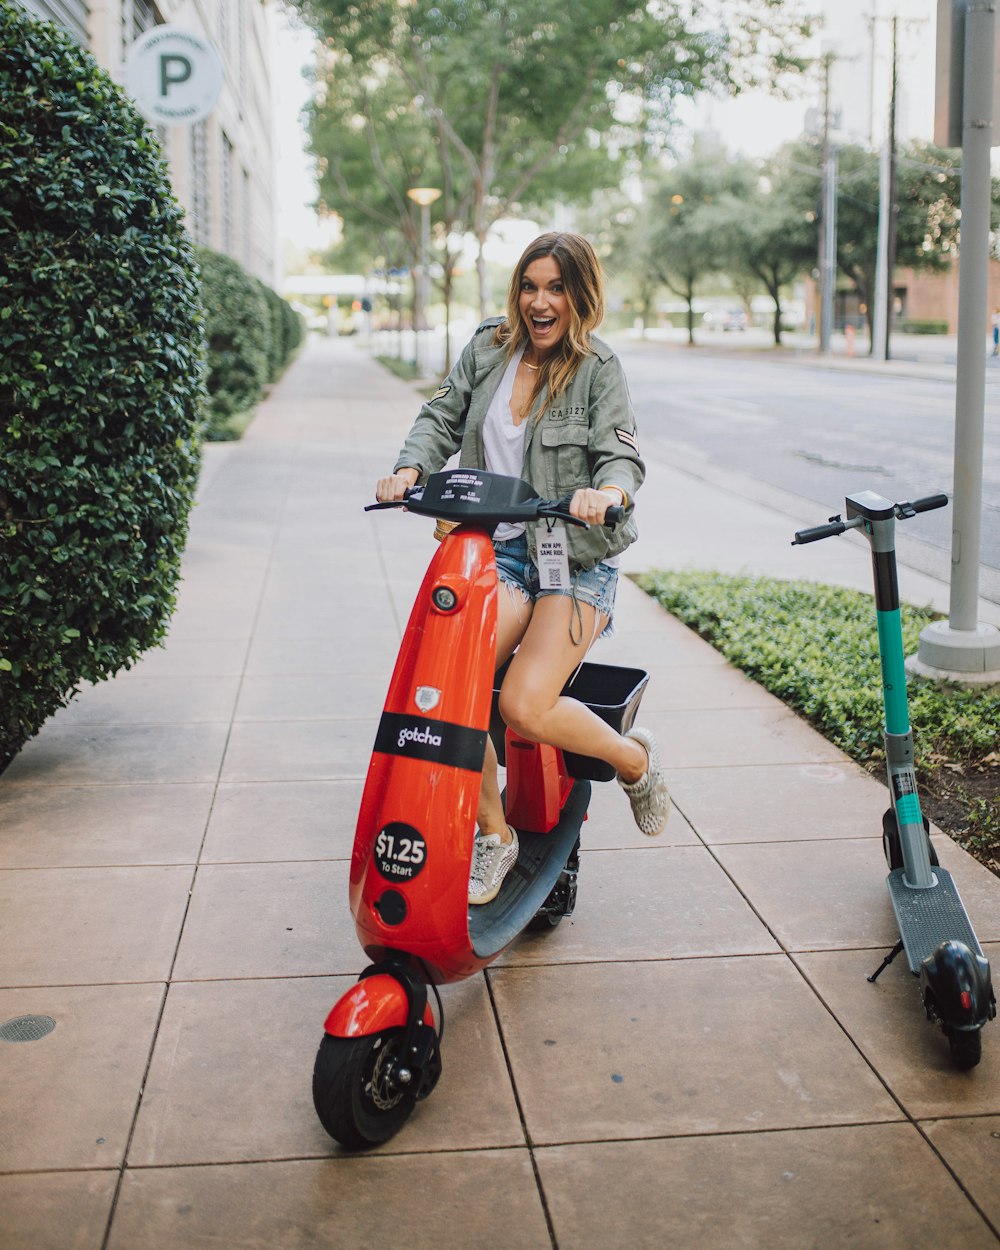 woman in gray jacket riding red and black motor scooter